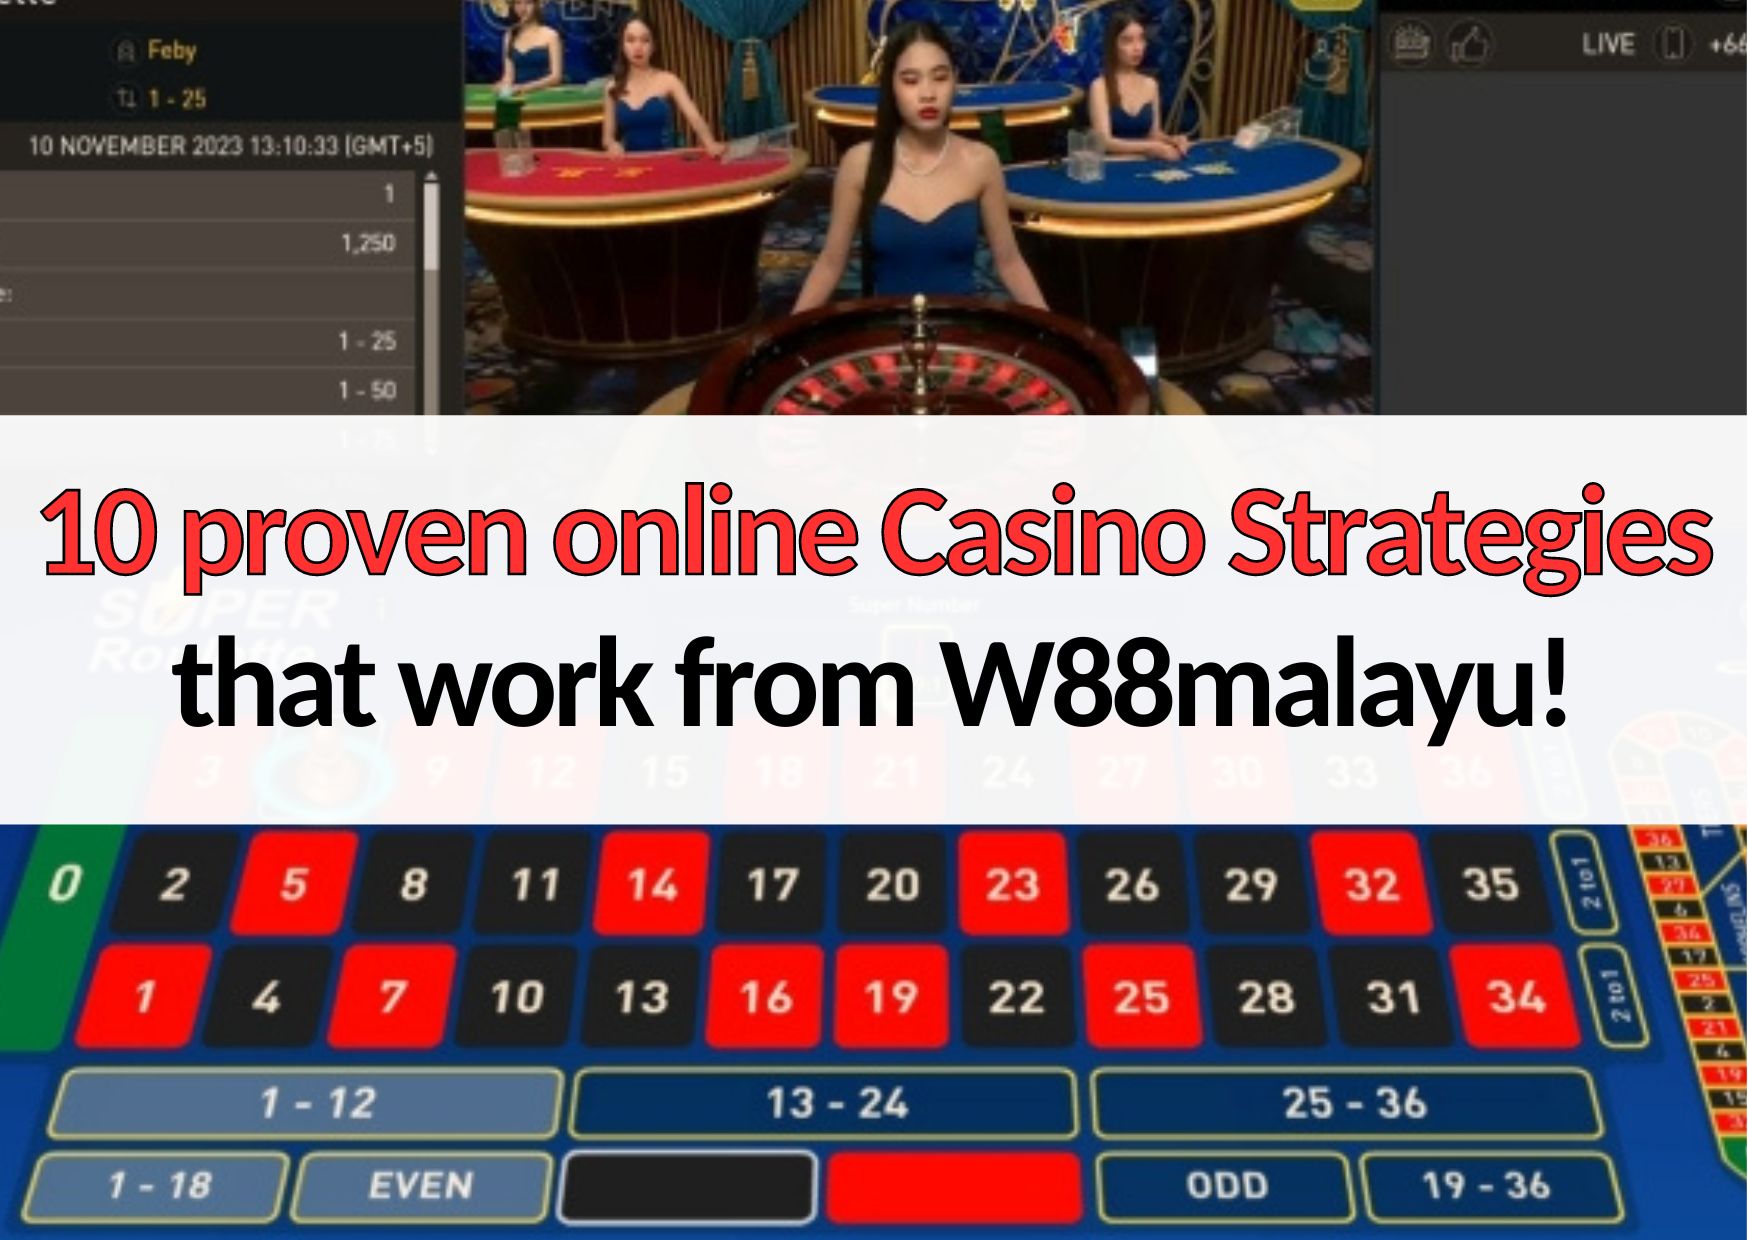 w88malayu online casino strategies for gambling that work every time